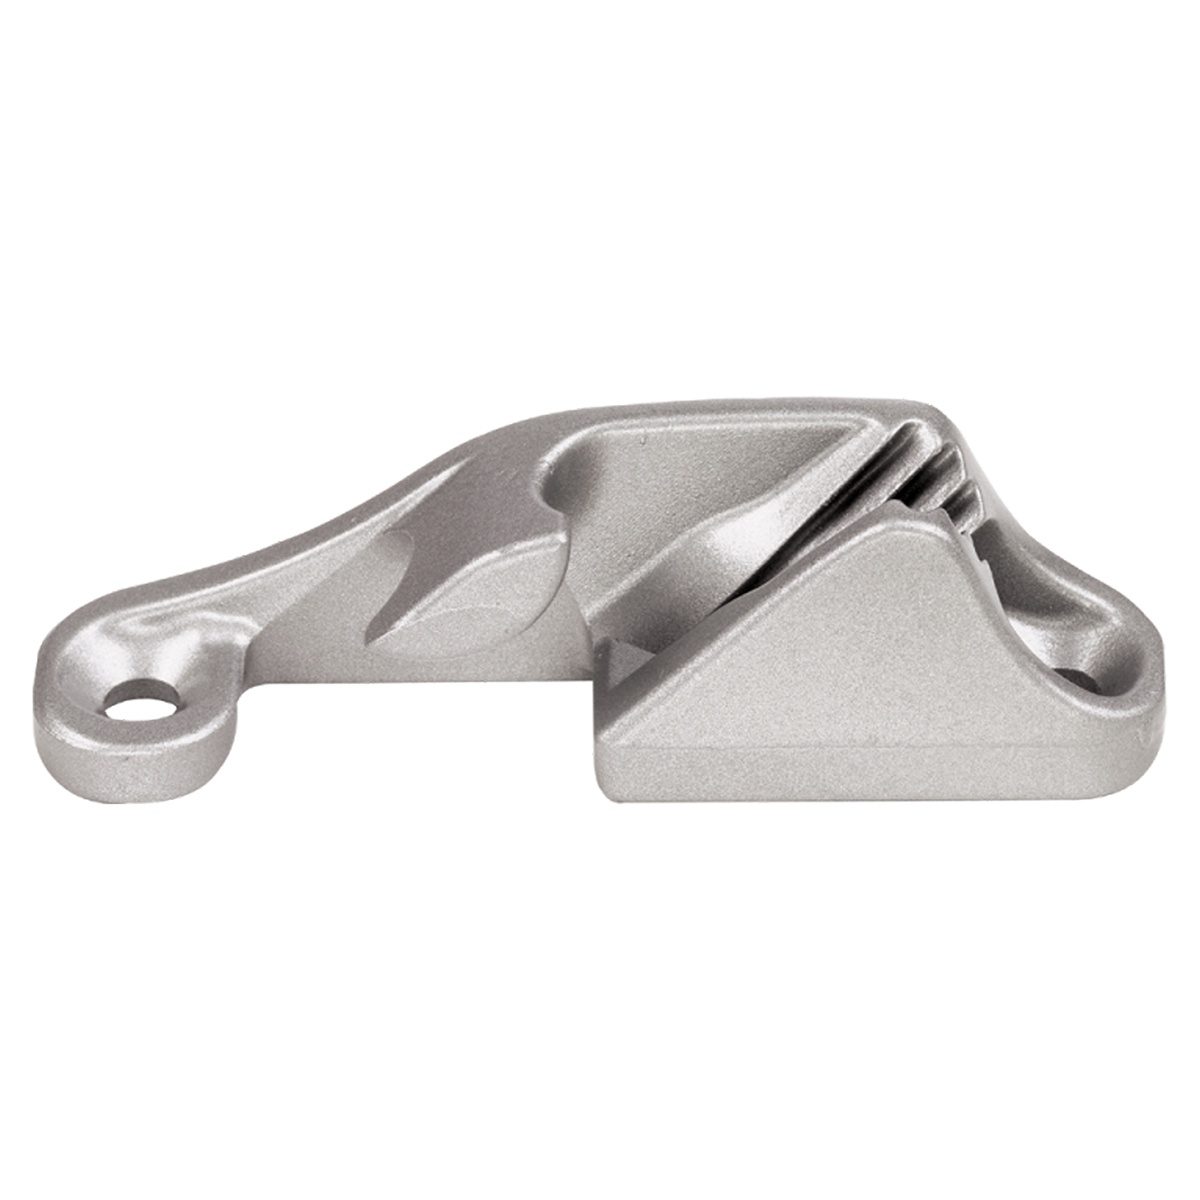 C218M1T - Clamcleat 6mm Side (P) Silver (Pk Size: 50)